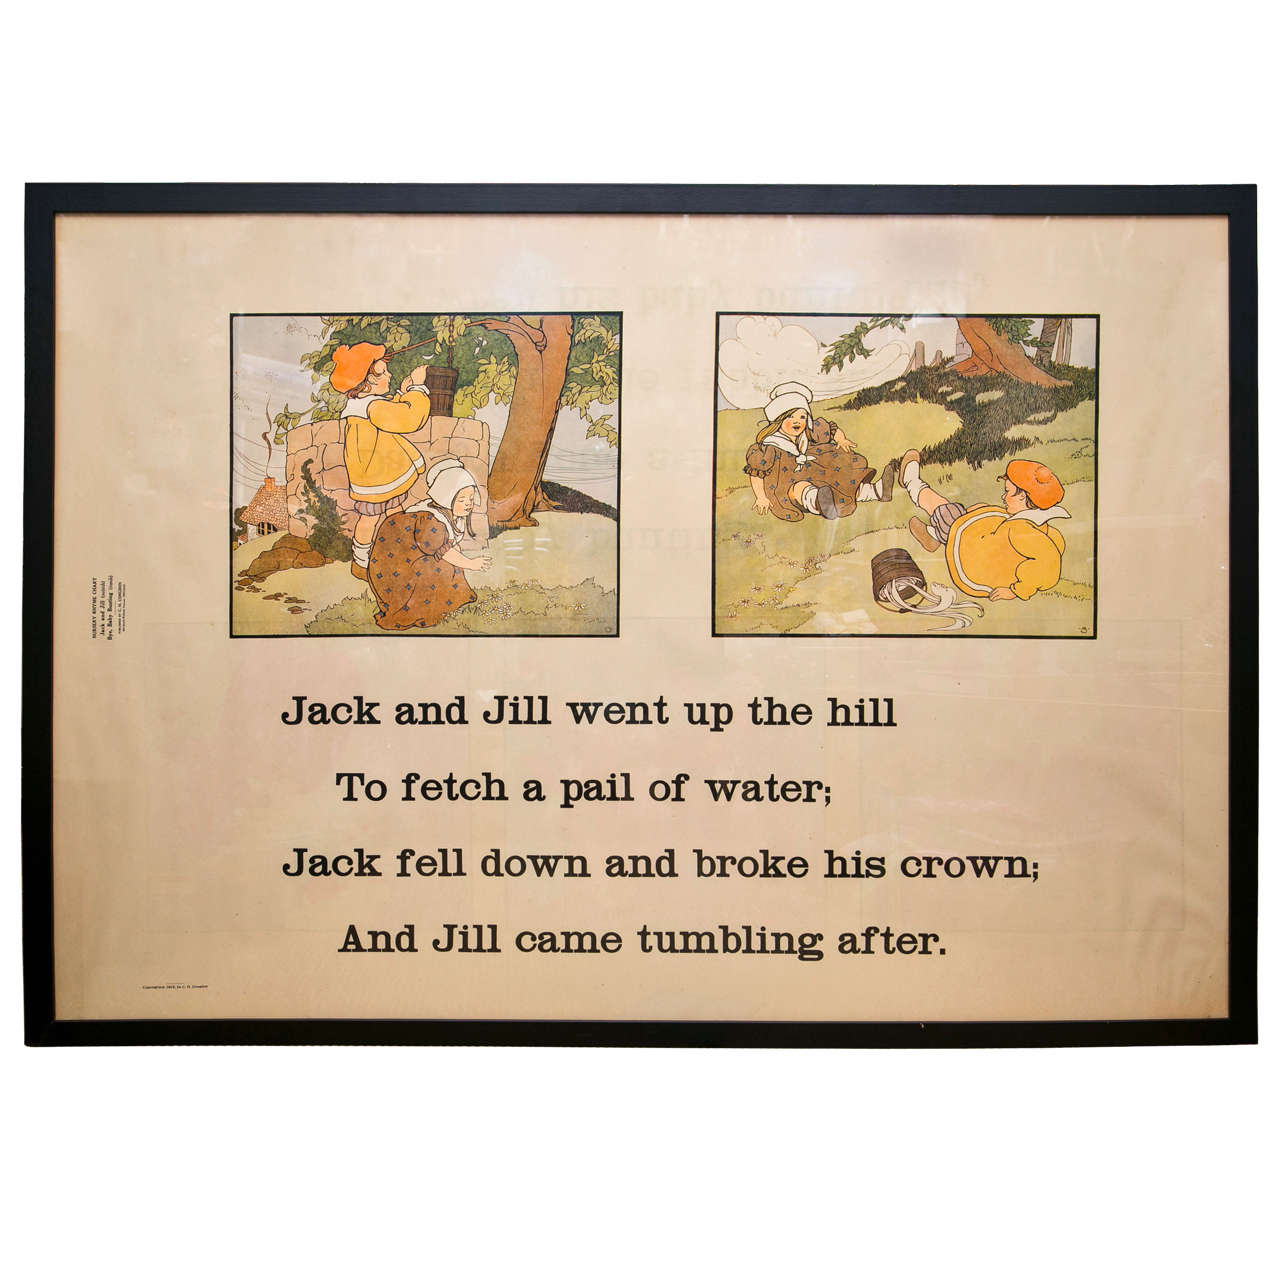 Framed Arts and Crafts Era Original "Jack and Jill" Nursery Rhyme Lithograph For Sale